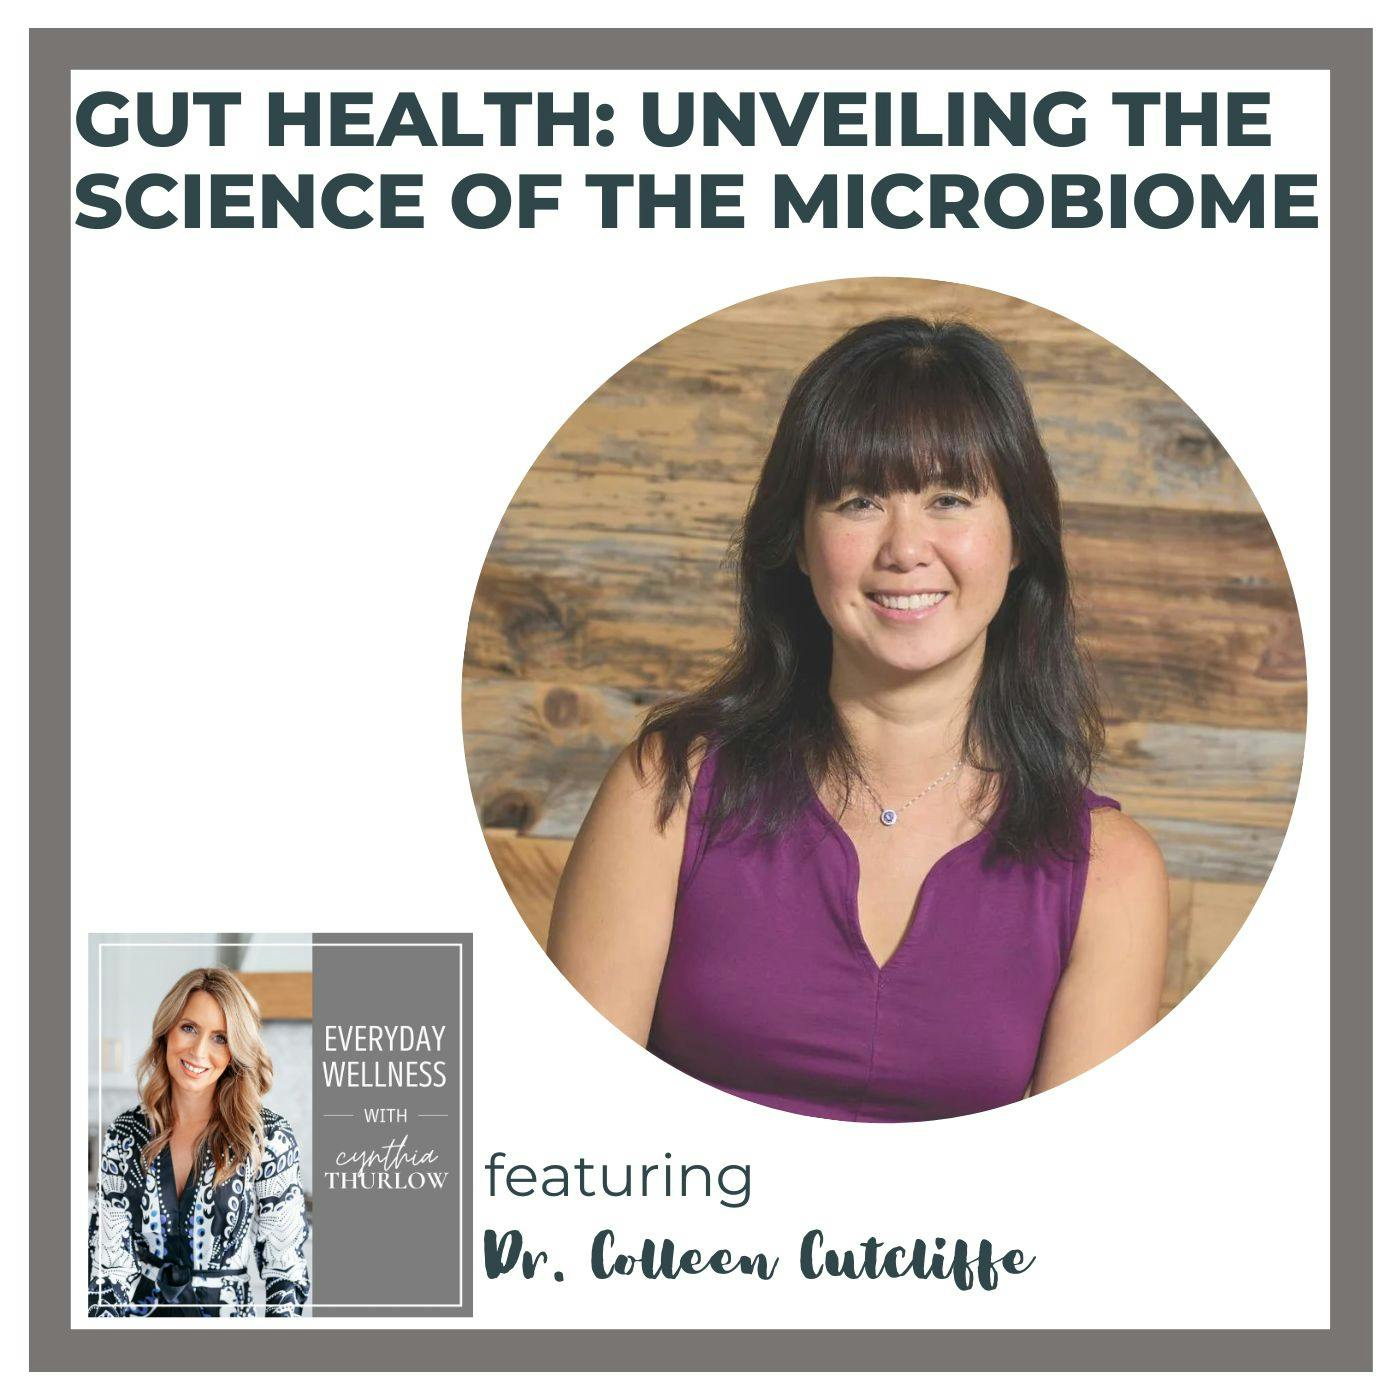 Ep. 346 Gut Health: Unveiling the Science of the Microbiome with Dr. Colleen Cutcliffe